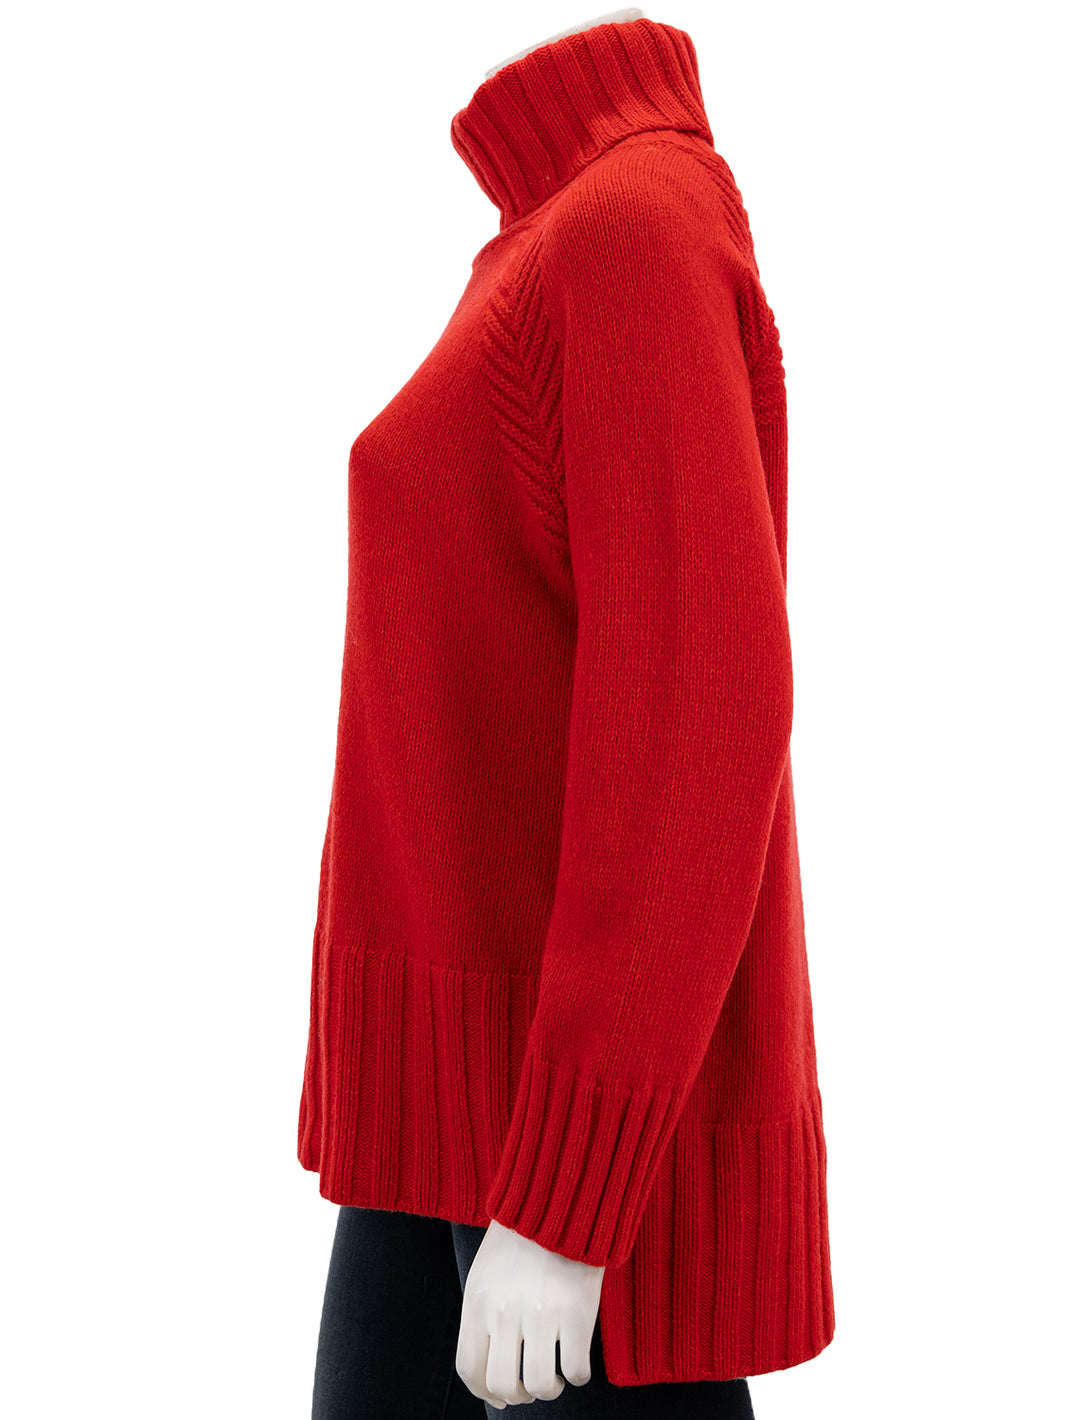 Side view of Barbour's norma turtleneck in blaze red.